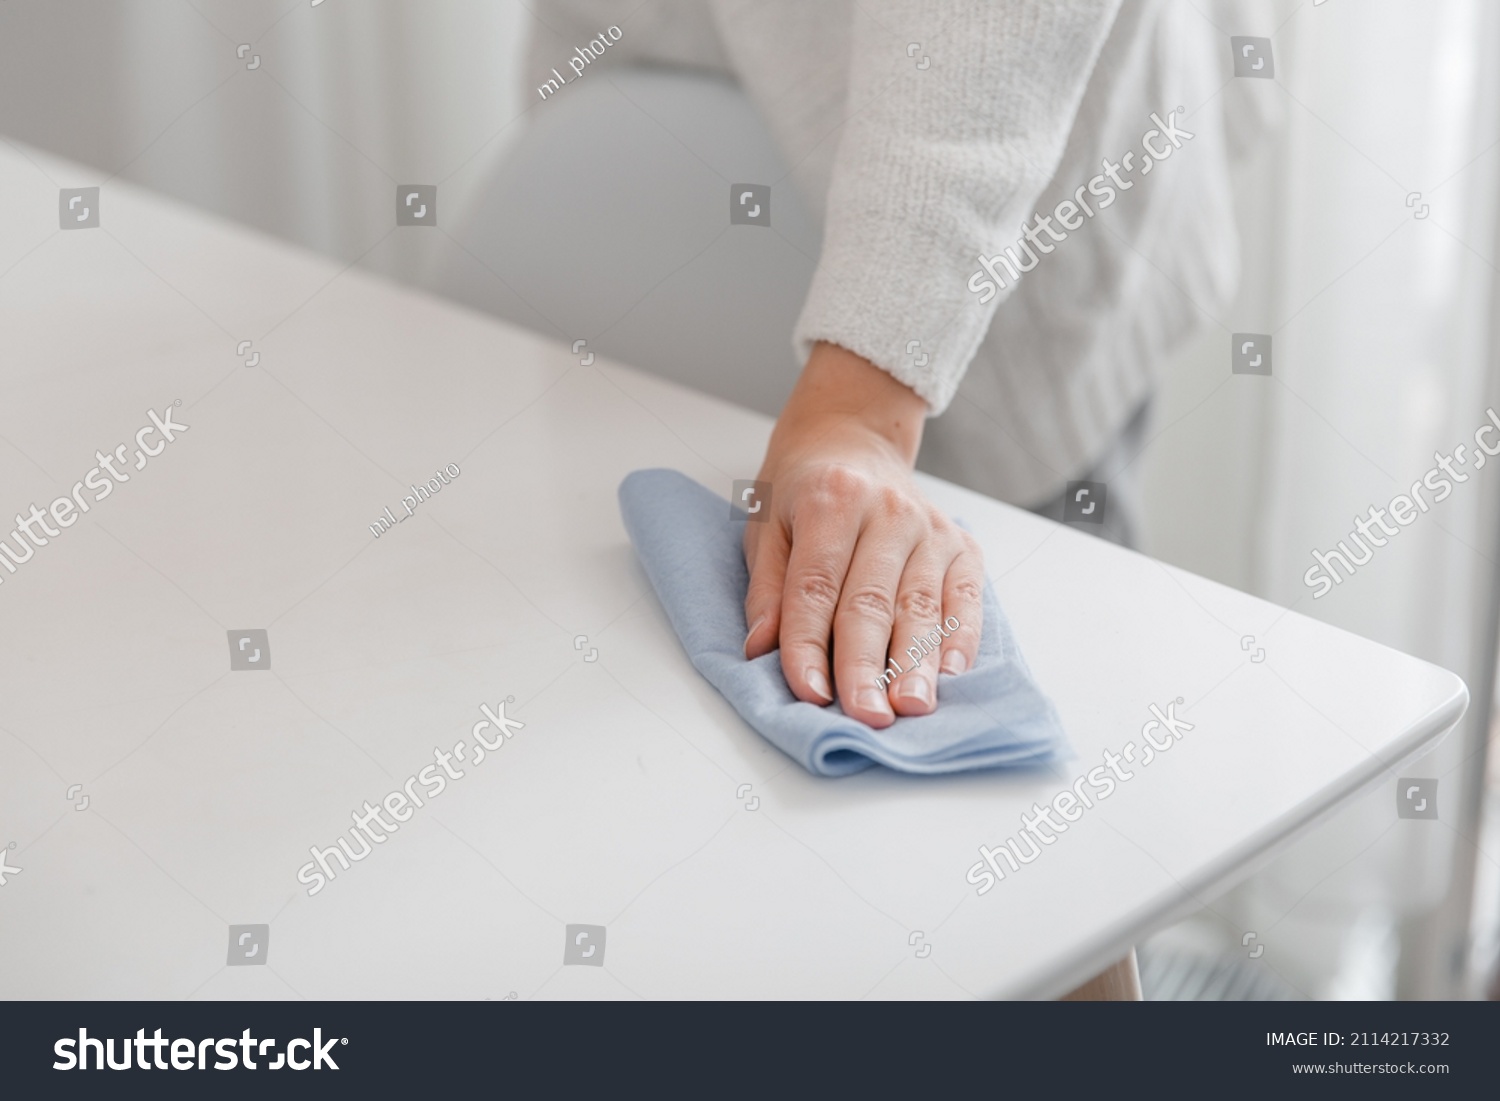 Cleaning the table with a blue microfiber cloth. Sanitize surfaces prevention in hospital and public spaces against coronavirus. Woman hand using wet wipe at home. Cleaning the room. #2114217332